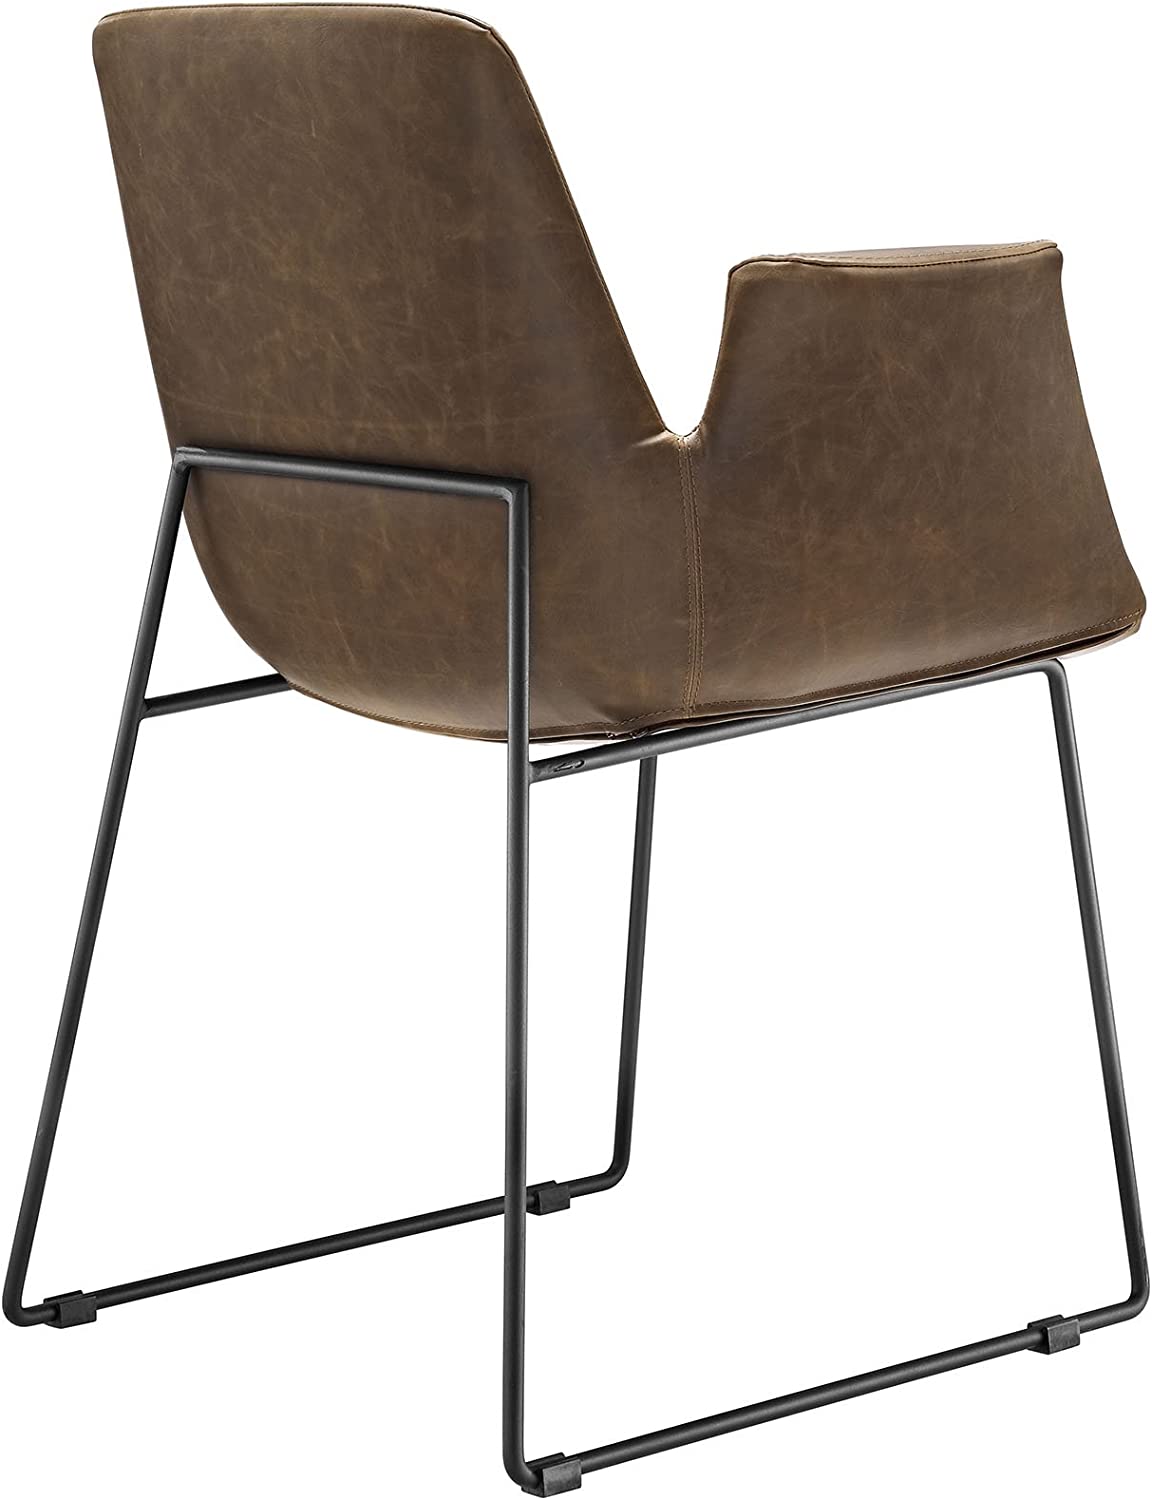 Modway Aloft Faux Leather Modern Farmhouse Kitchen and Dining Room Chair in Brown